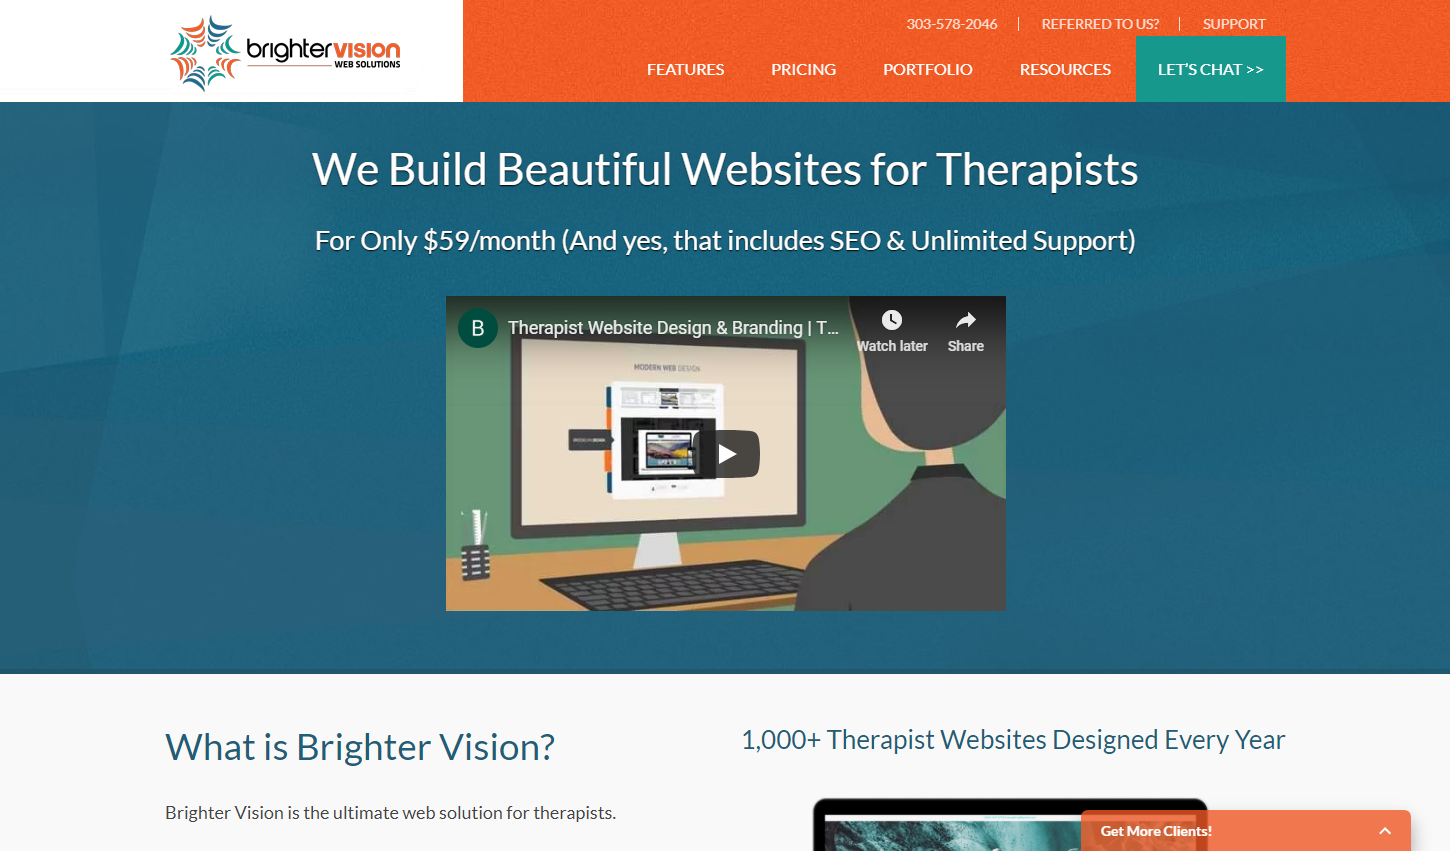 Brighter Vision website home page | 3 Myths About Web Design That You Need to Ditch in 2019 | Brighter Vision Web Solutions | Marketing Blog for Therapists